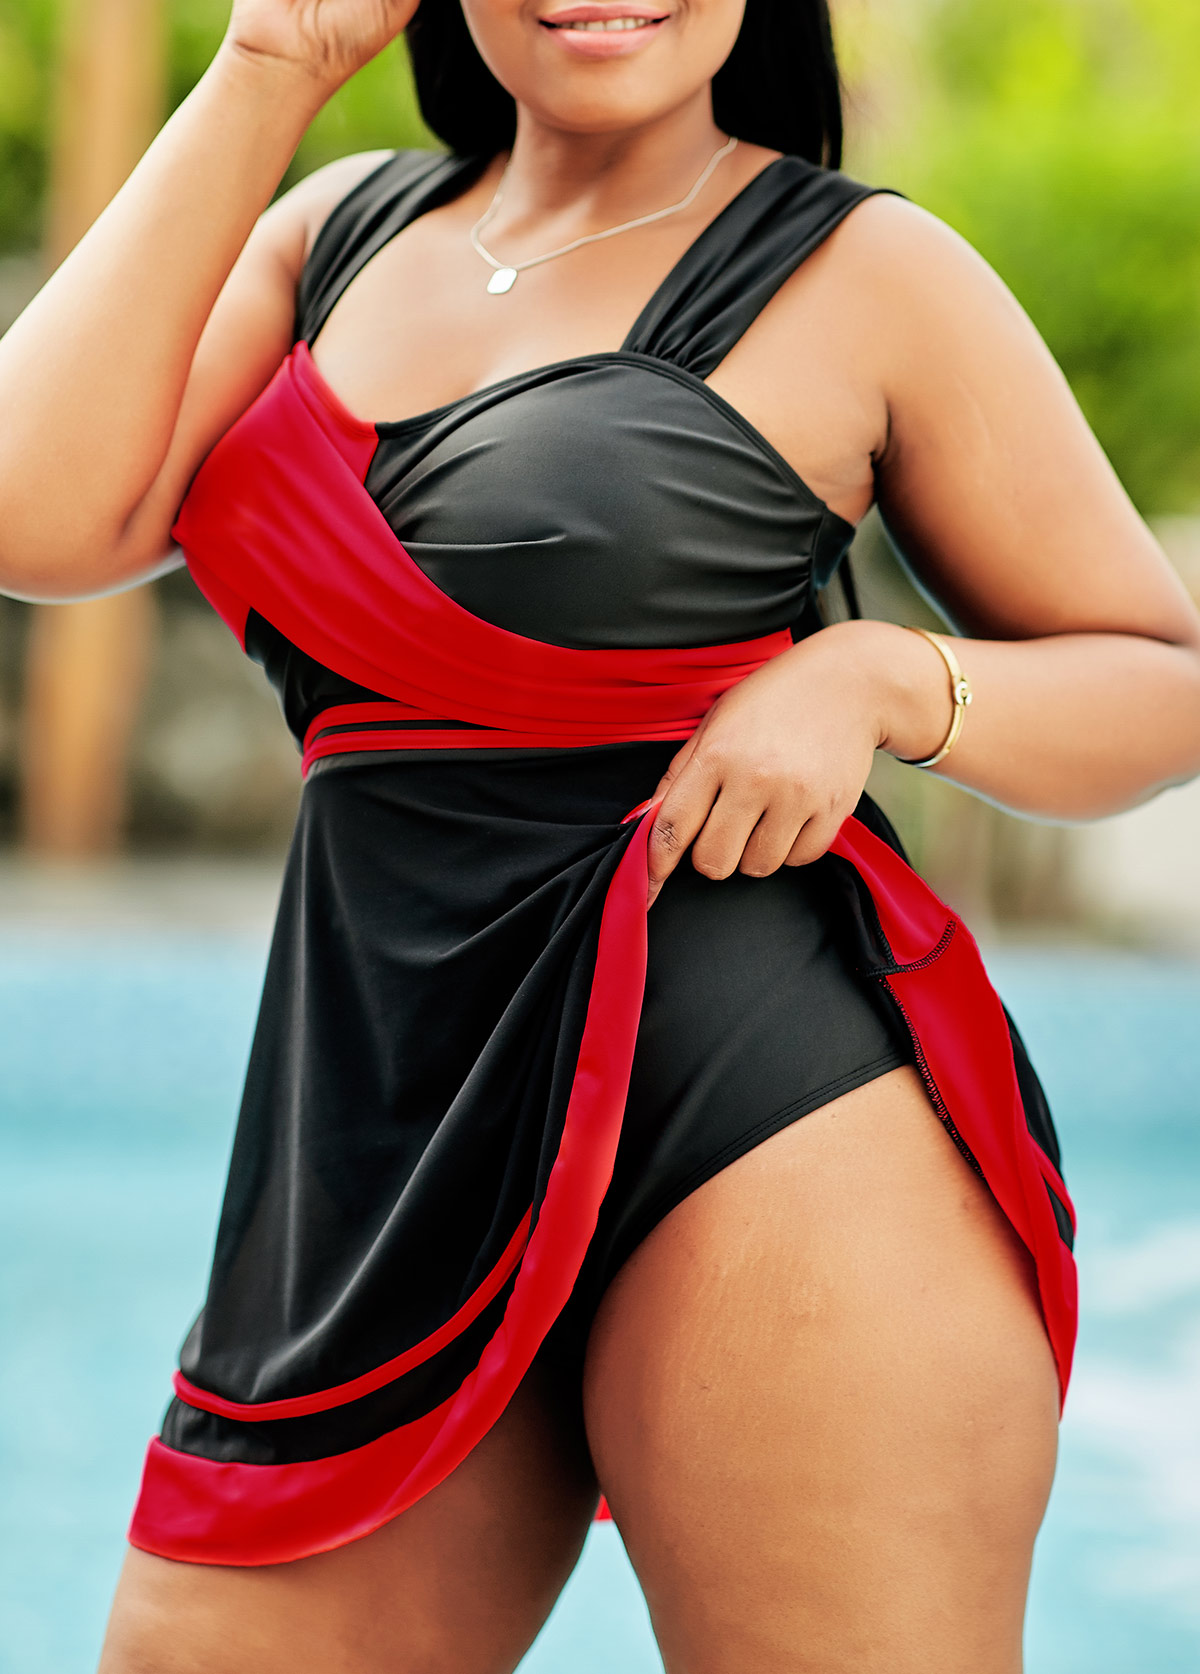 Contrast Plus Size Swimdress and Panty